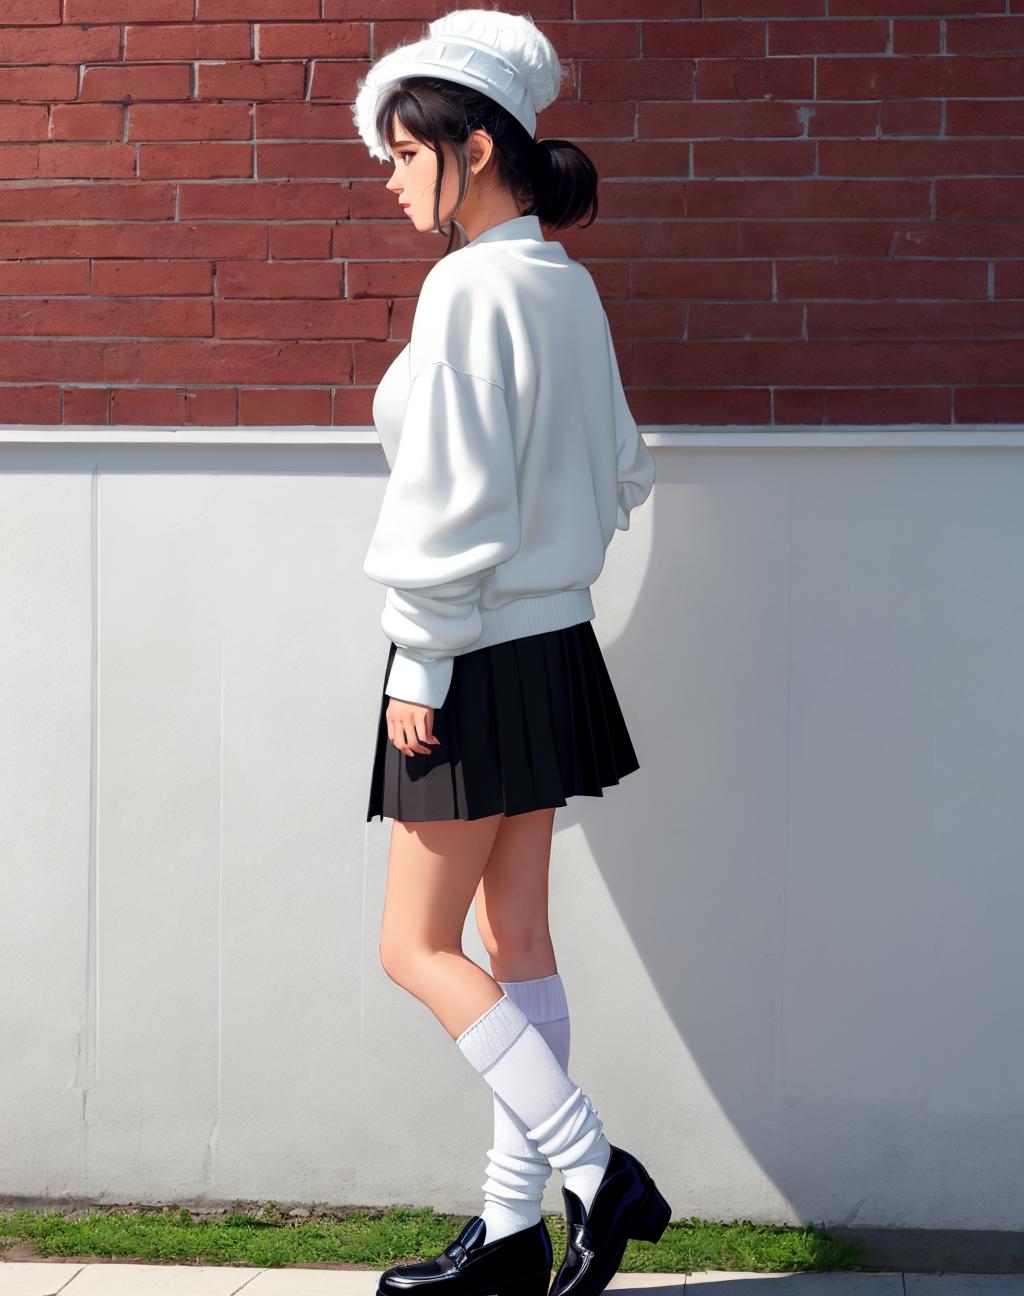 Absolute Territory | Knee Socks/Thigh High - Updated and ReLoHaded image by EDG